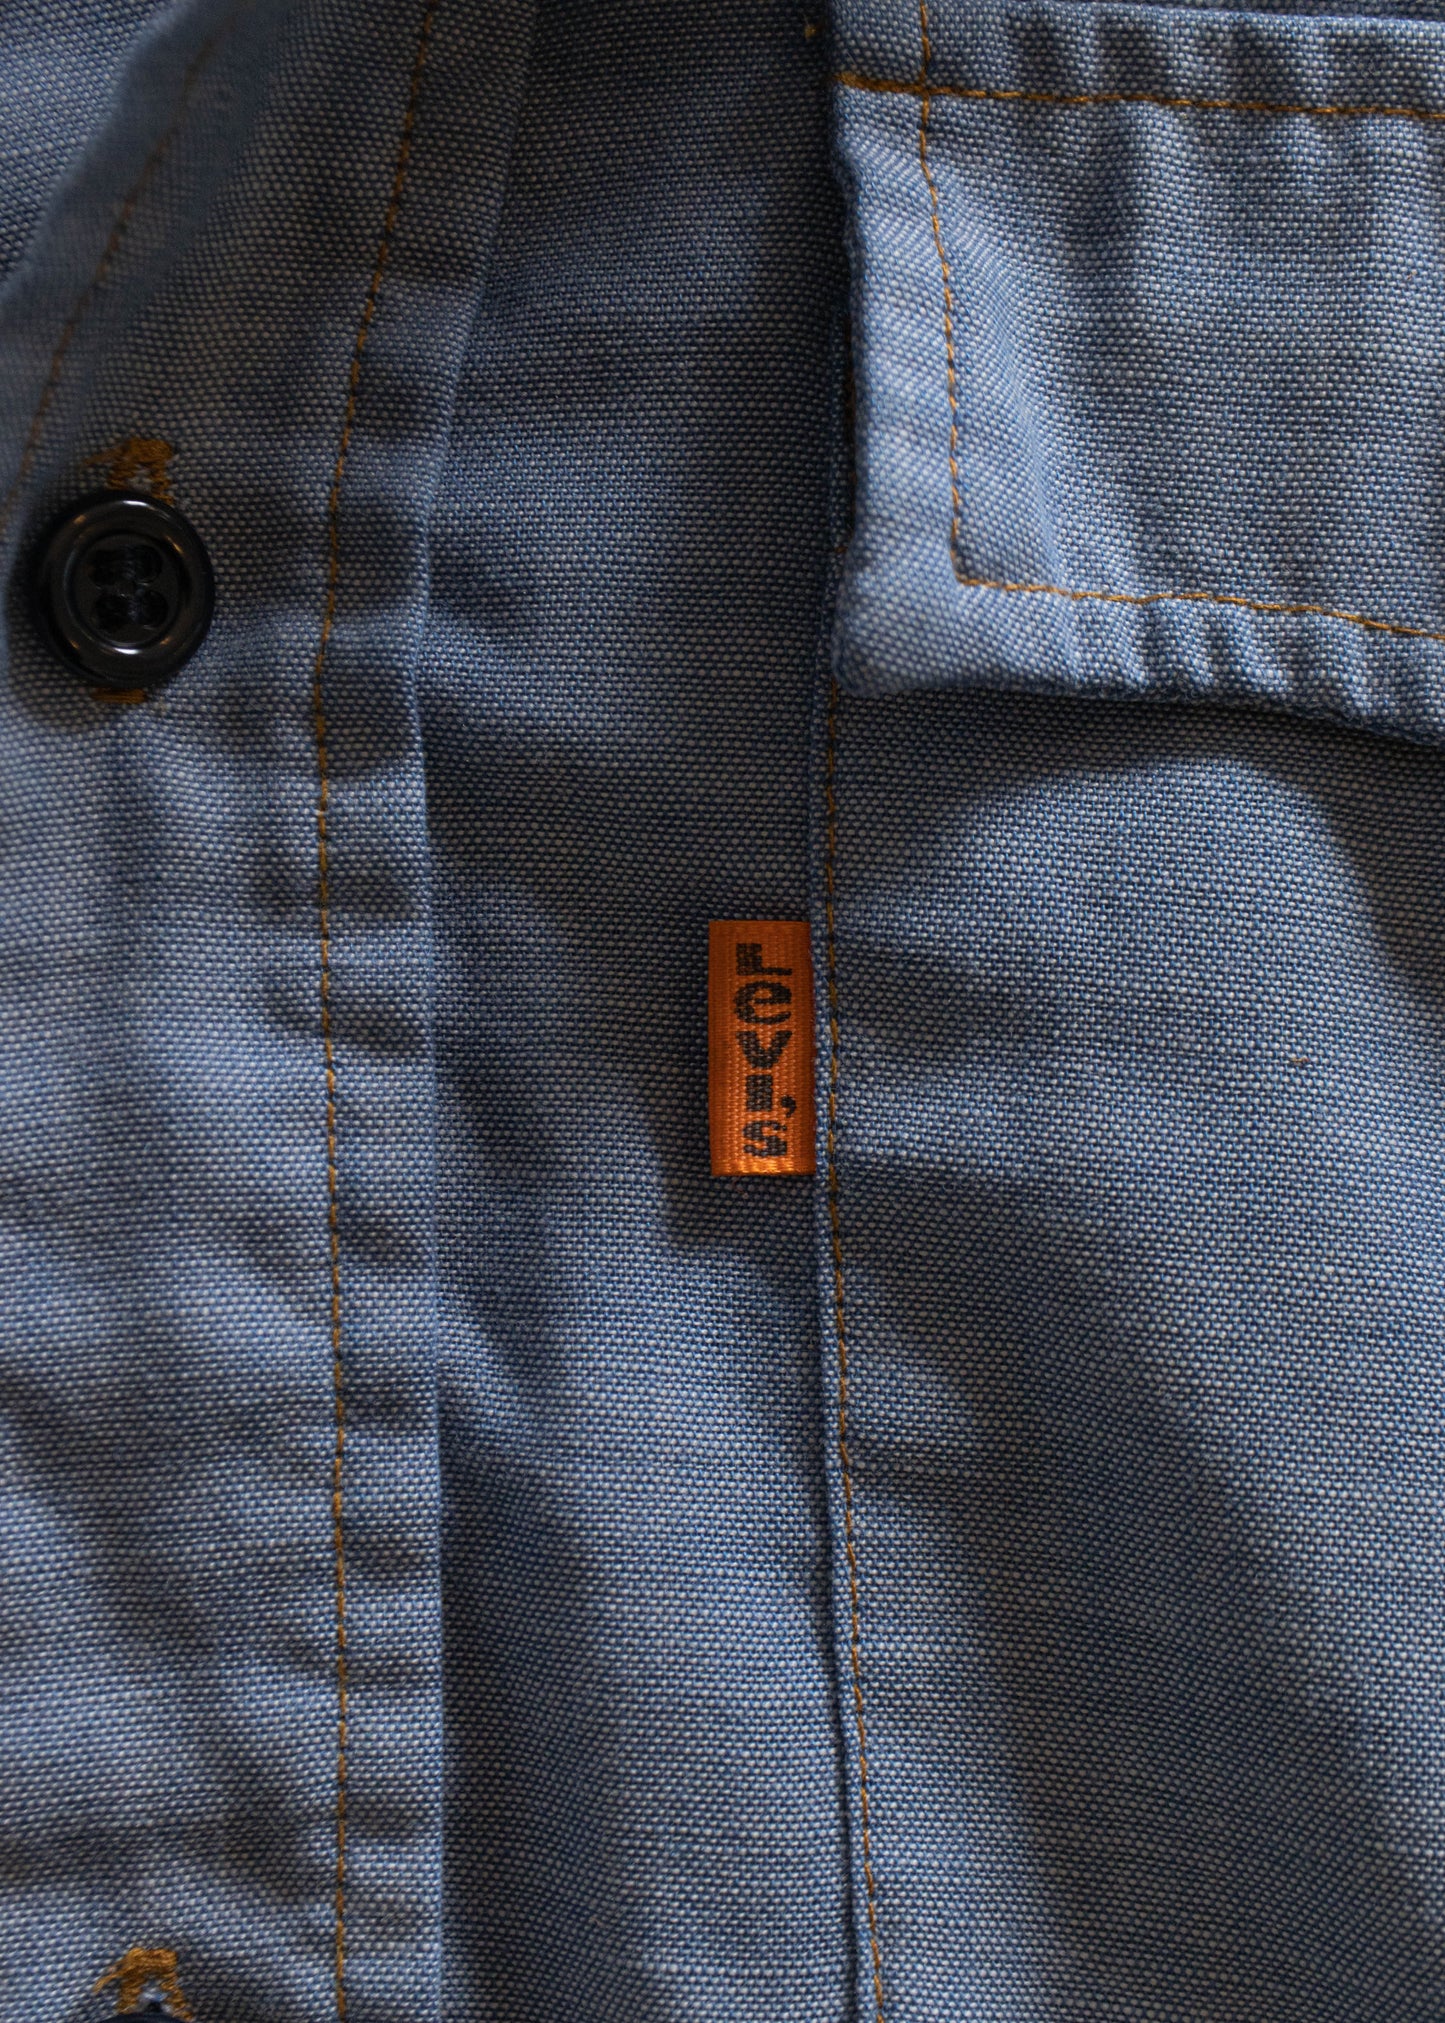 1970s Levi's Orange Tab Chambray Button up Shirt Size S/M